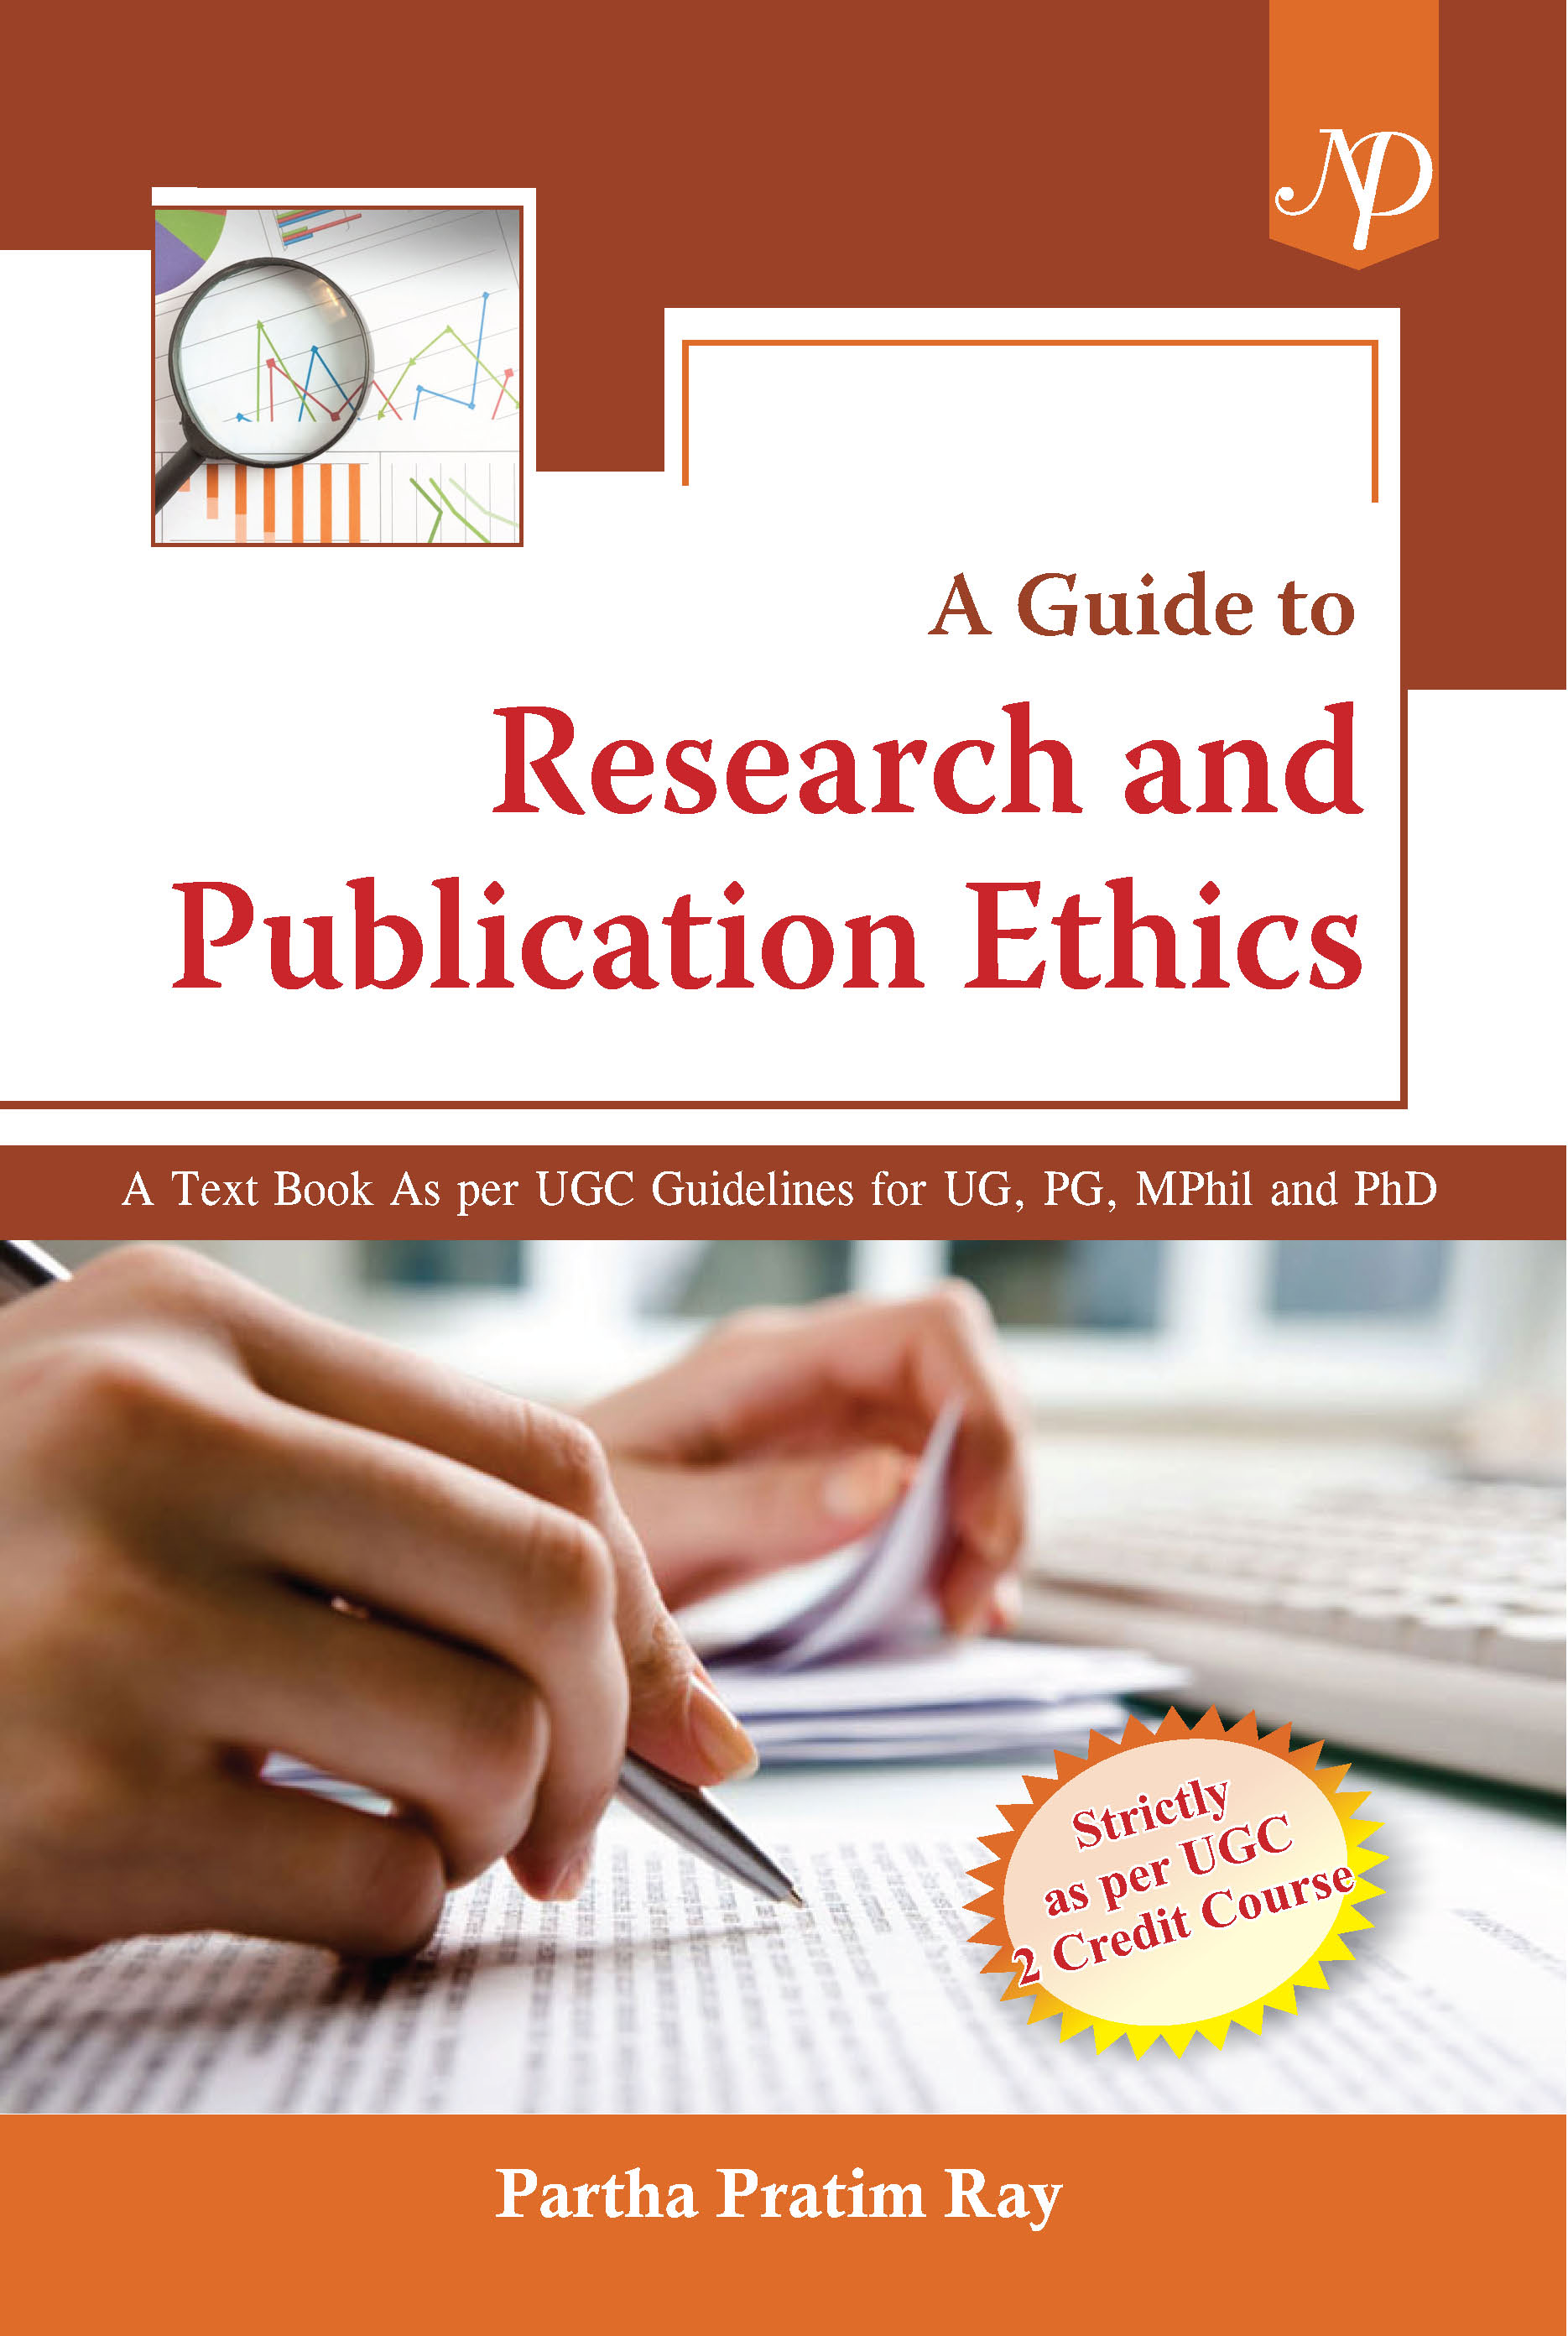 Research and Publication Ethics Cover.jpg